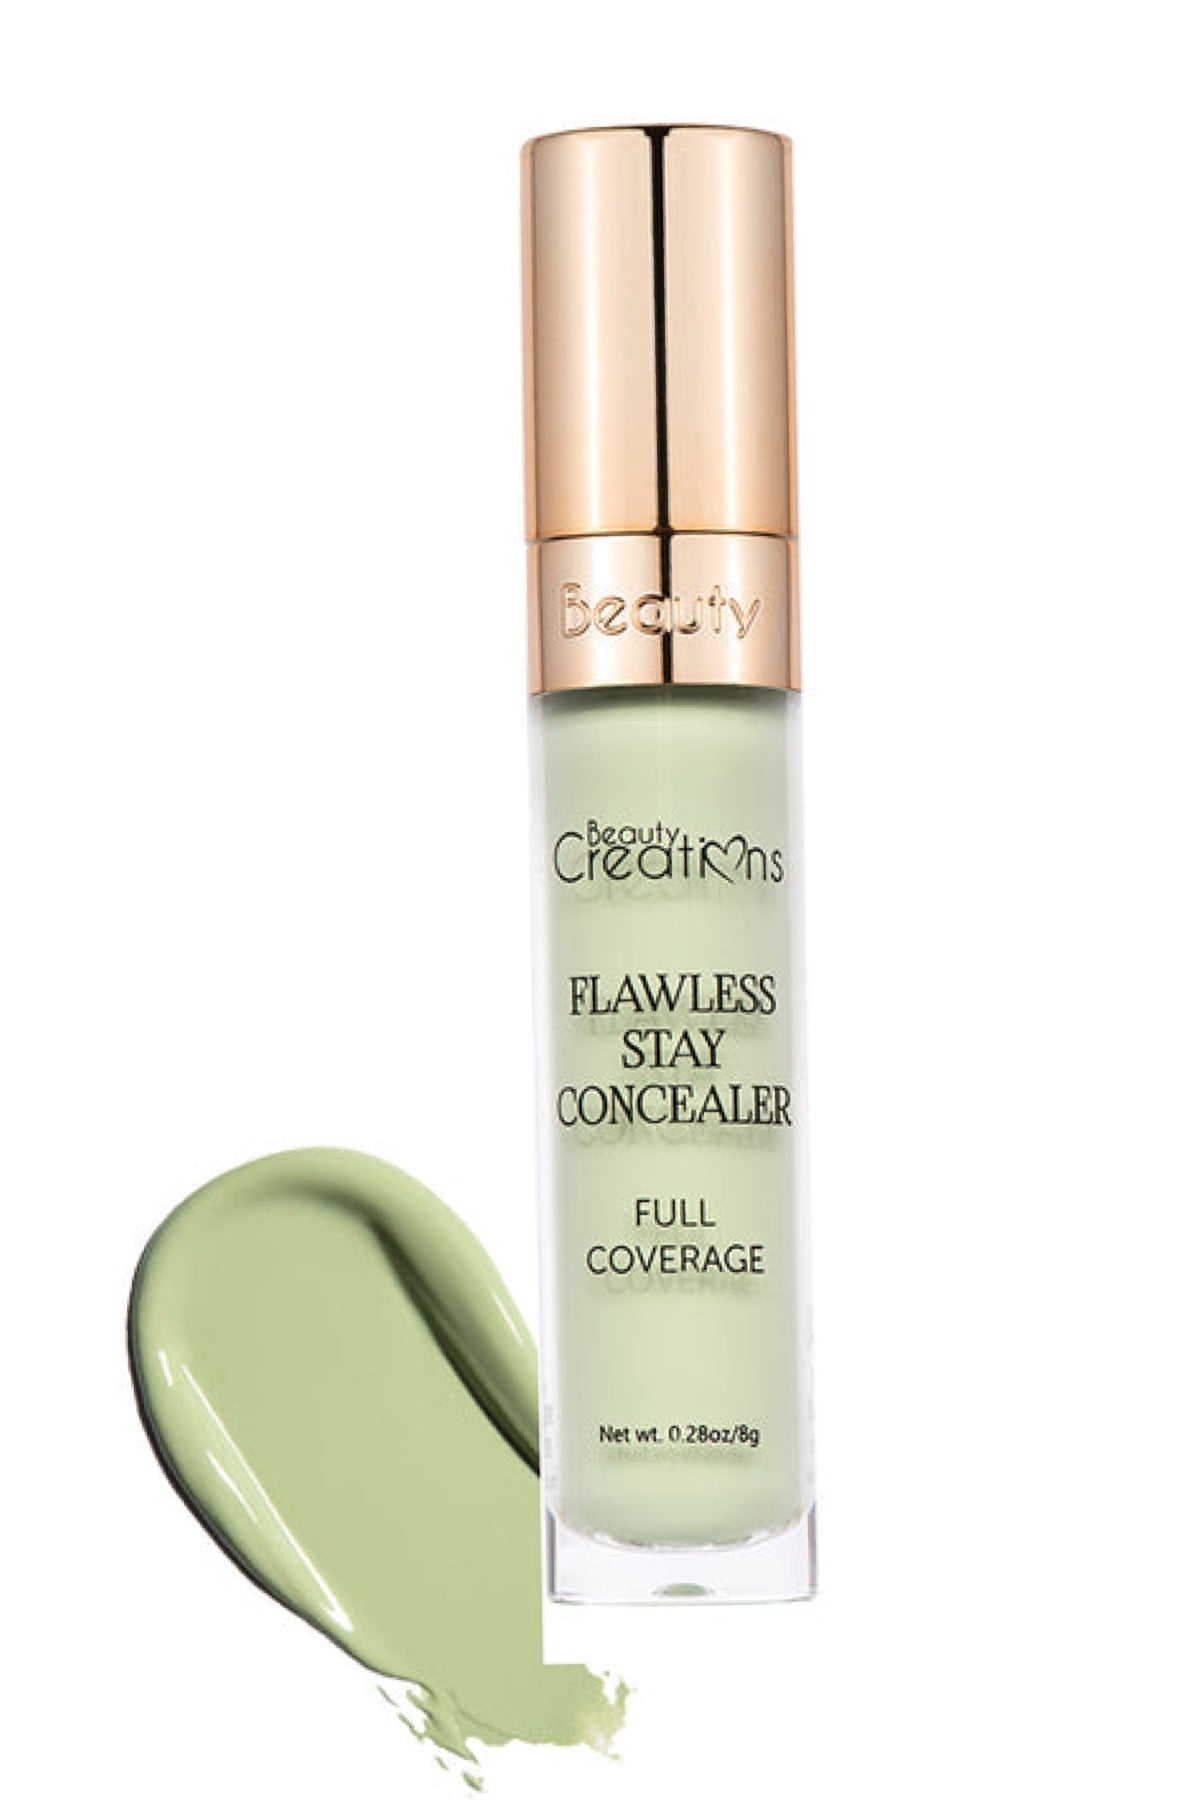 Flawless Stay Color Corrector - Green Vibe Clothing Company 